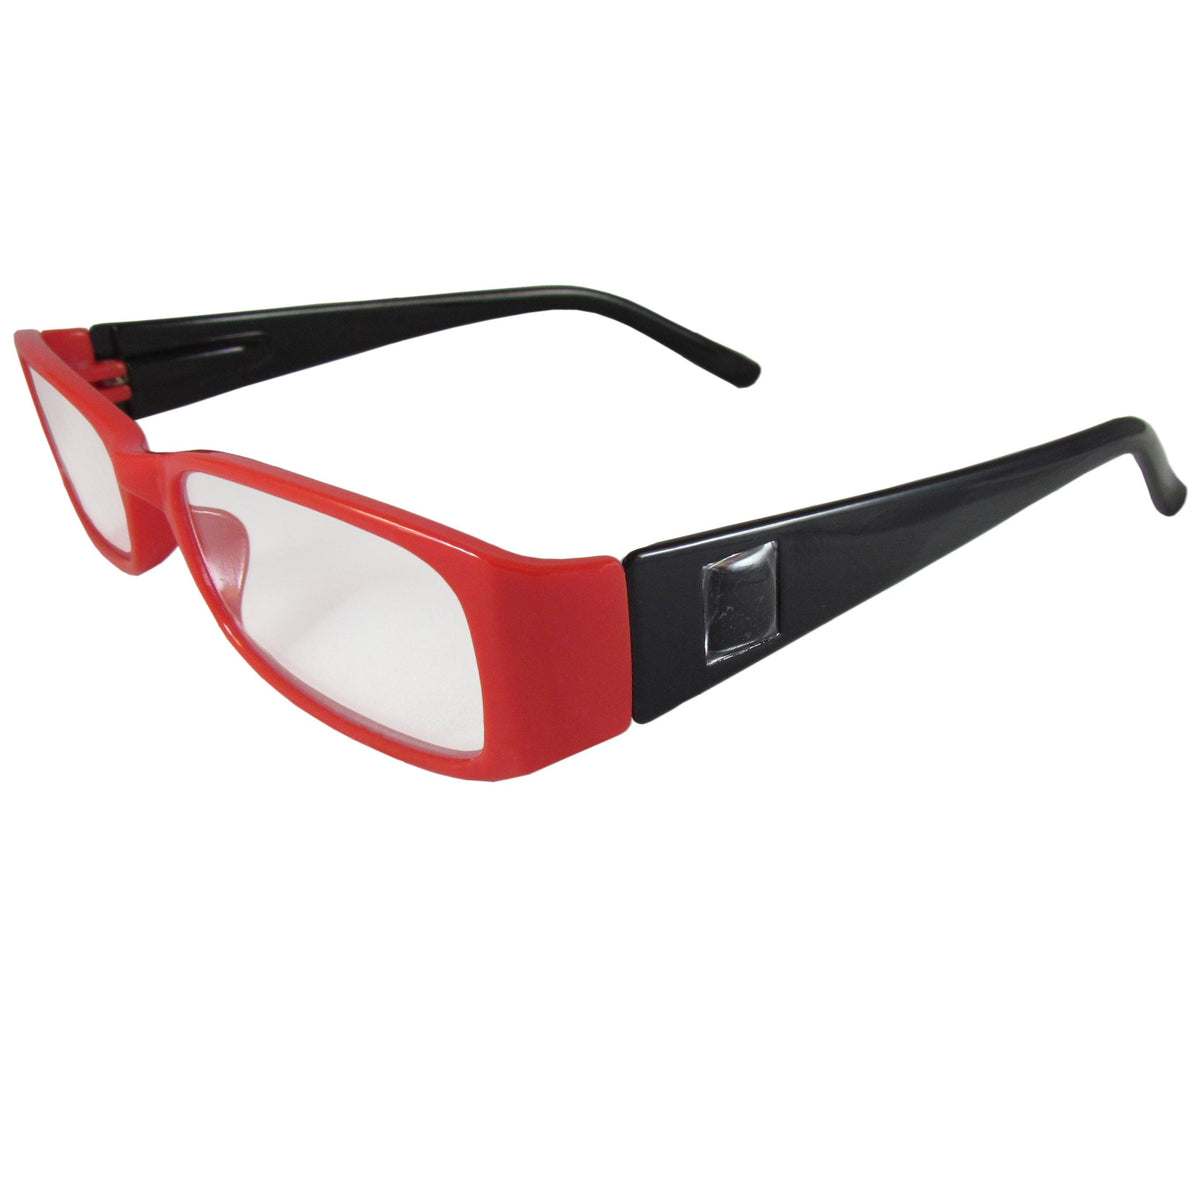 Red and Black Reading Glasses Power +1.50, 3 pack - Flyclothing LLC